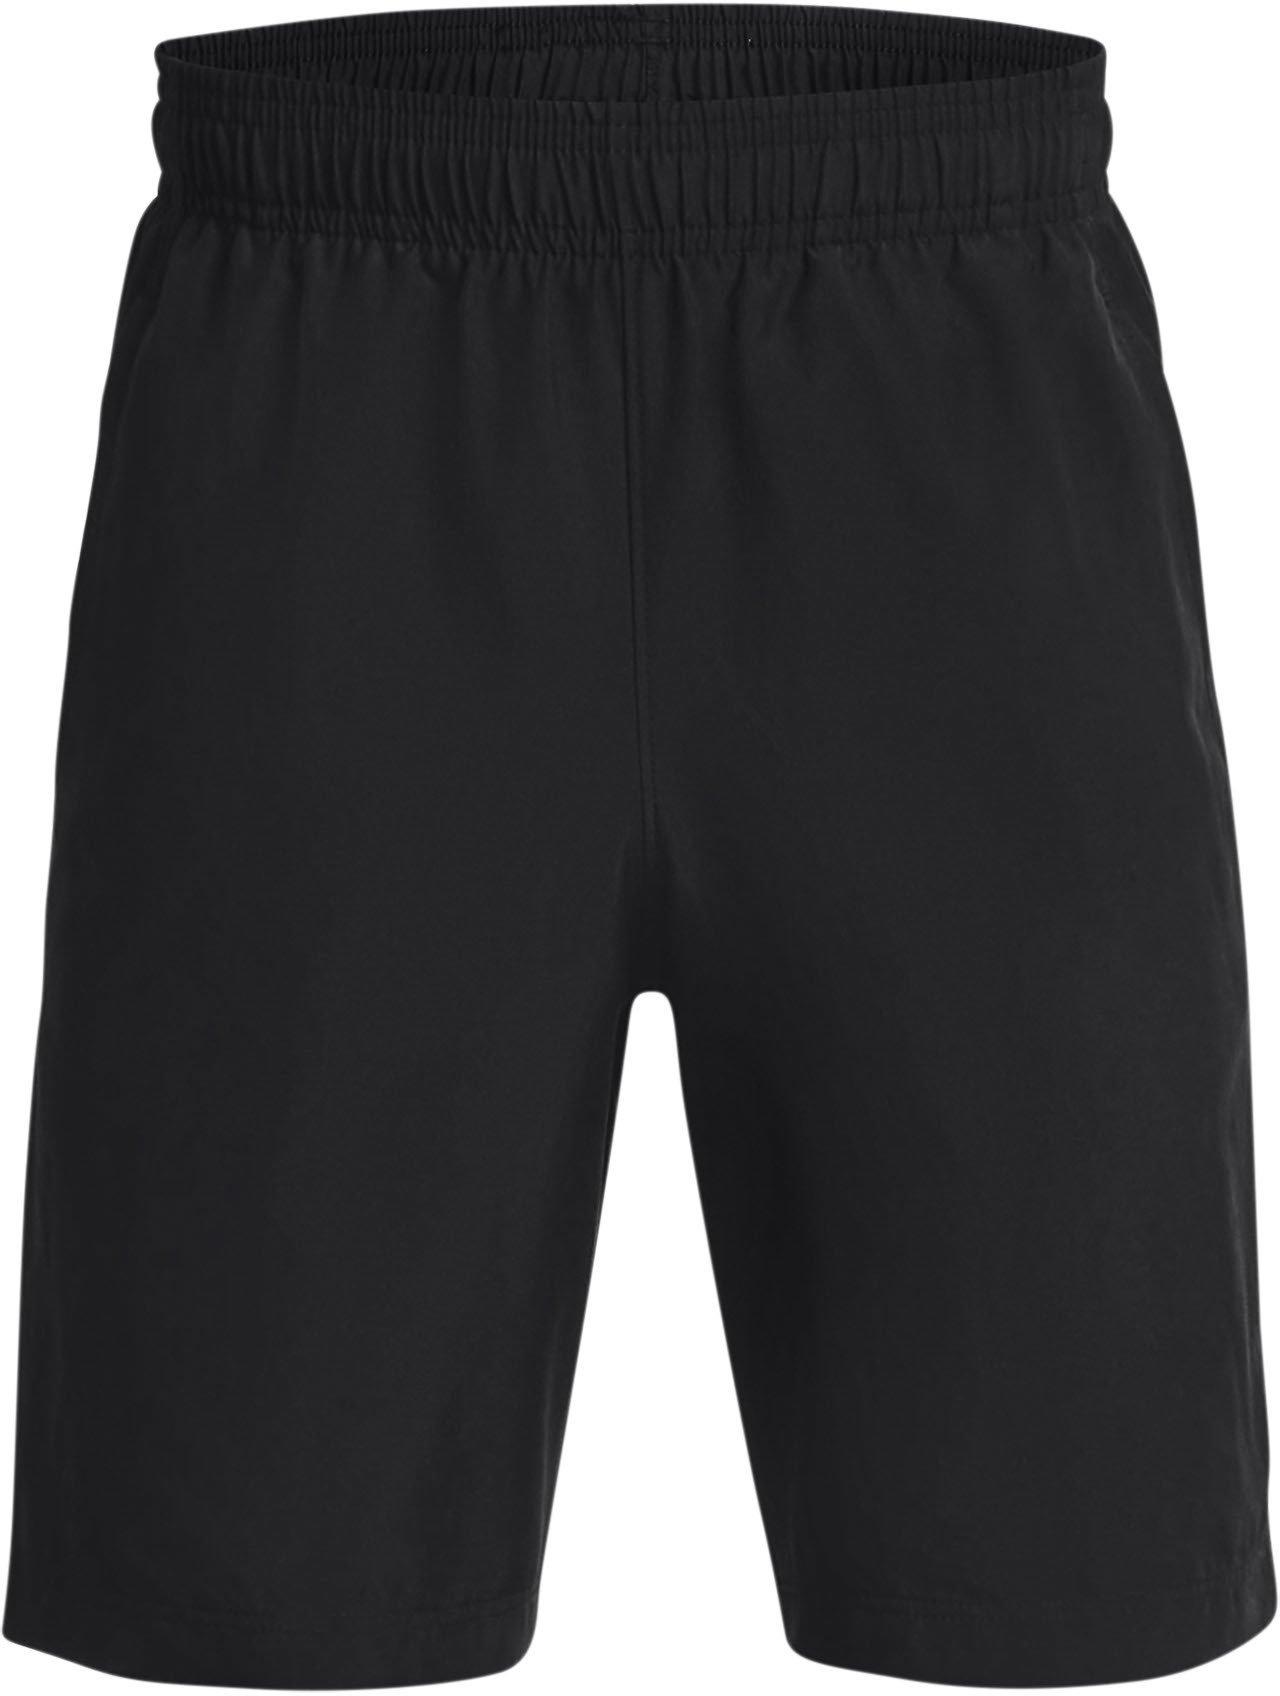 Under Armour Woven Graphic Shorts-BLK XL